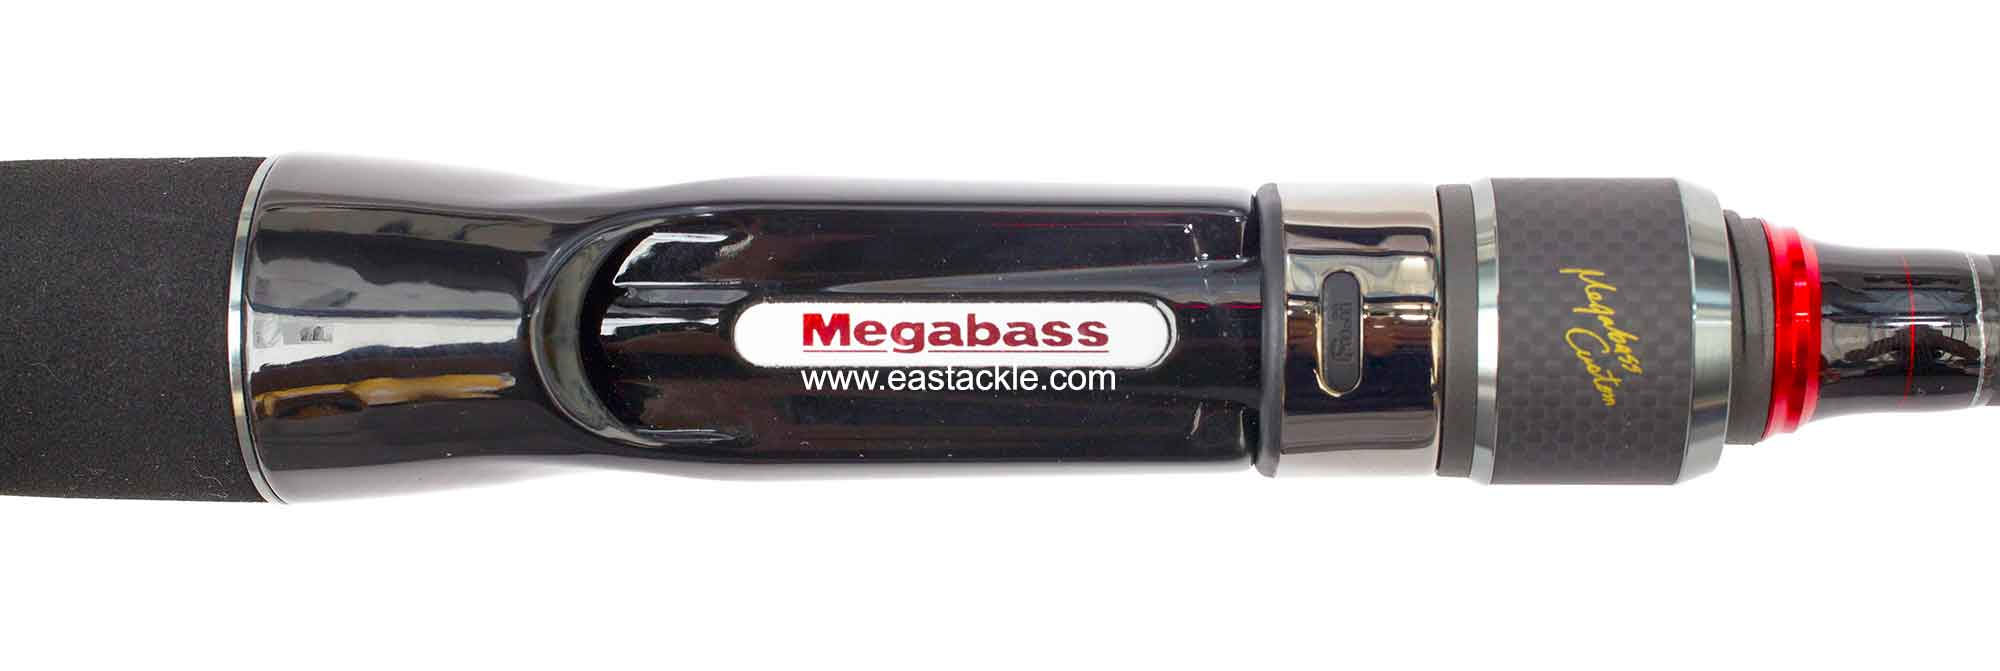 Megabass - Racing Condition World Edition - RCC-732H - Bait Casting Rod - Reel Seat (Top View)